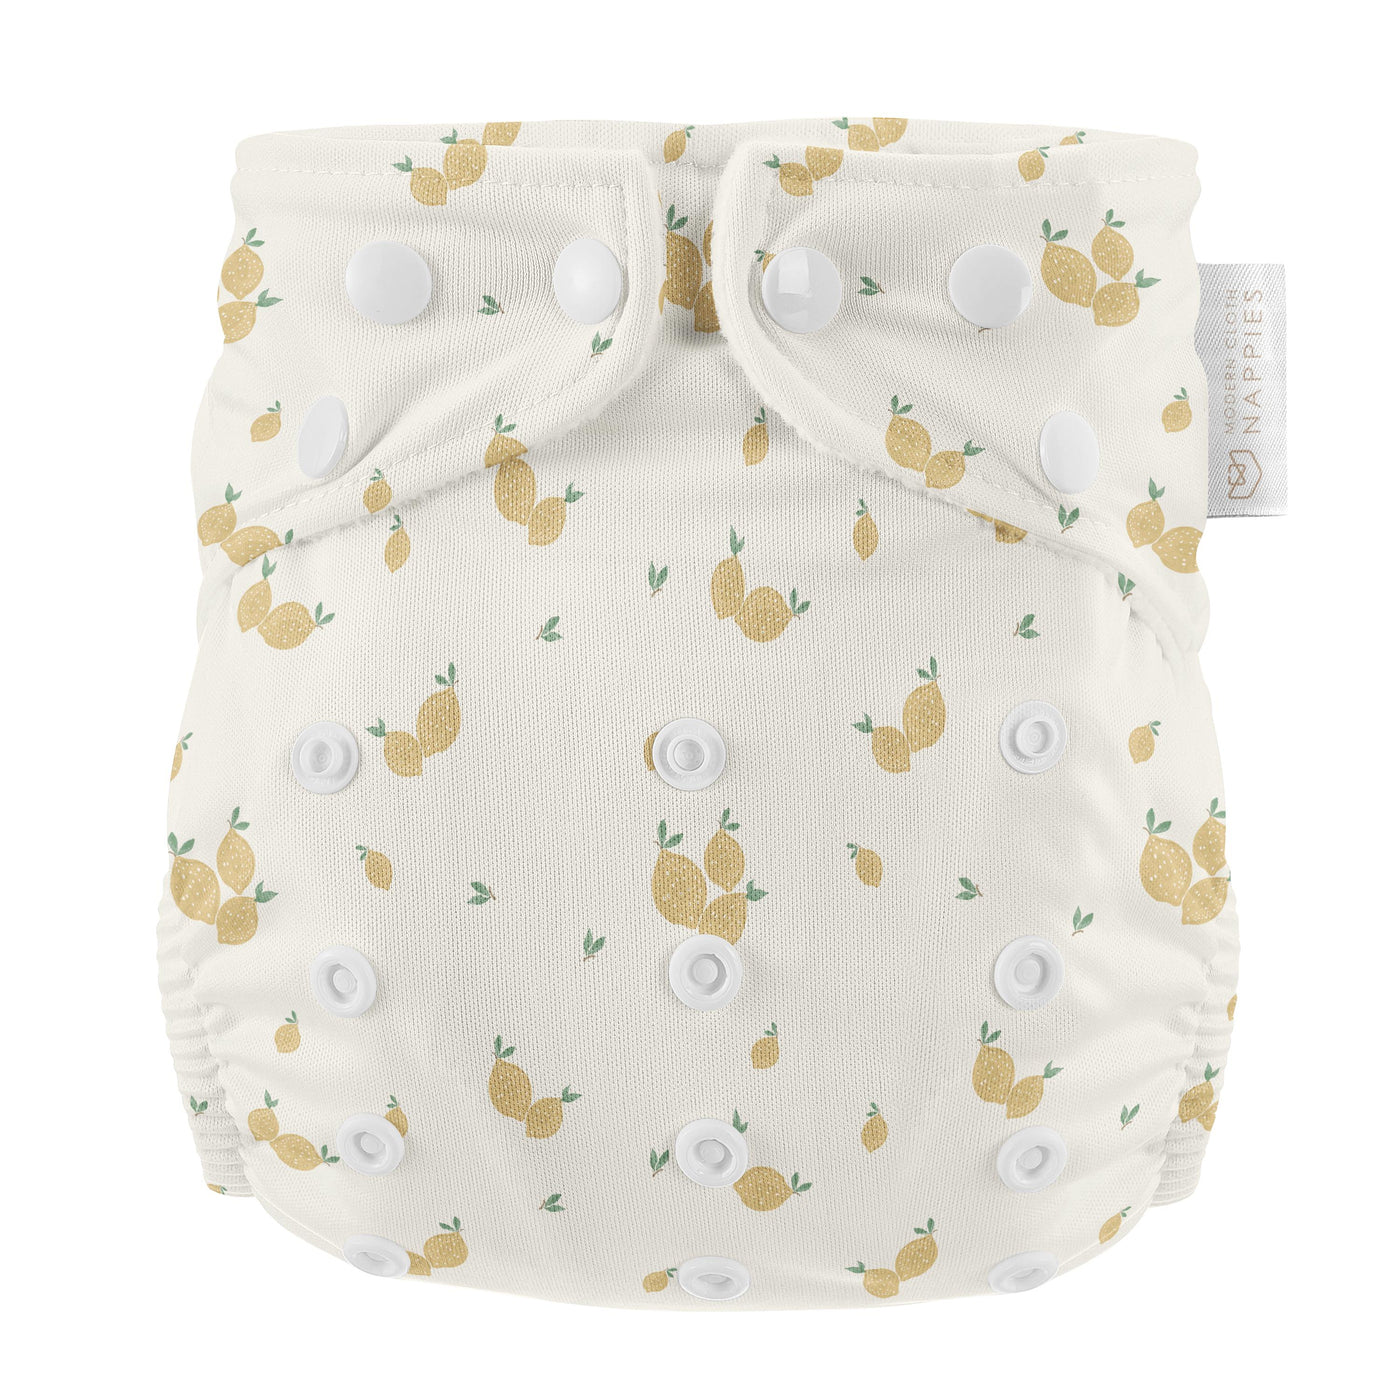 Plus Size Reusable Swim Nappies-Modern Cloth Nappies-Yes Bebe